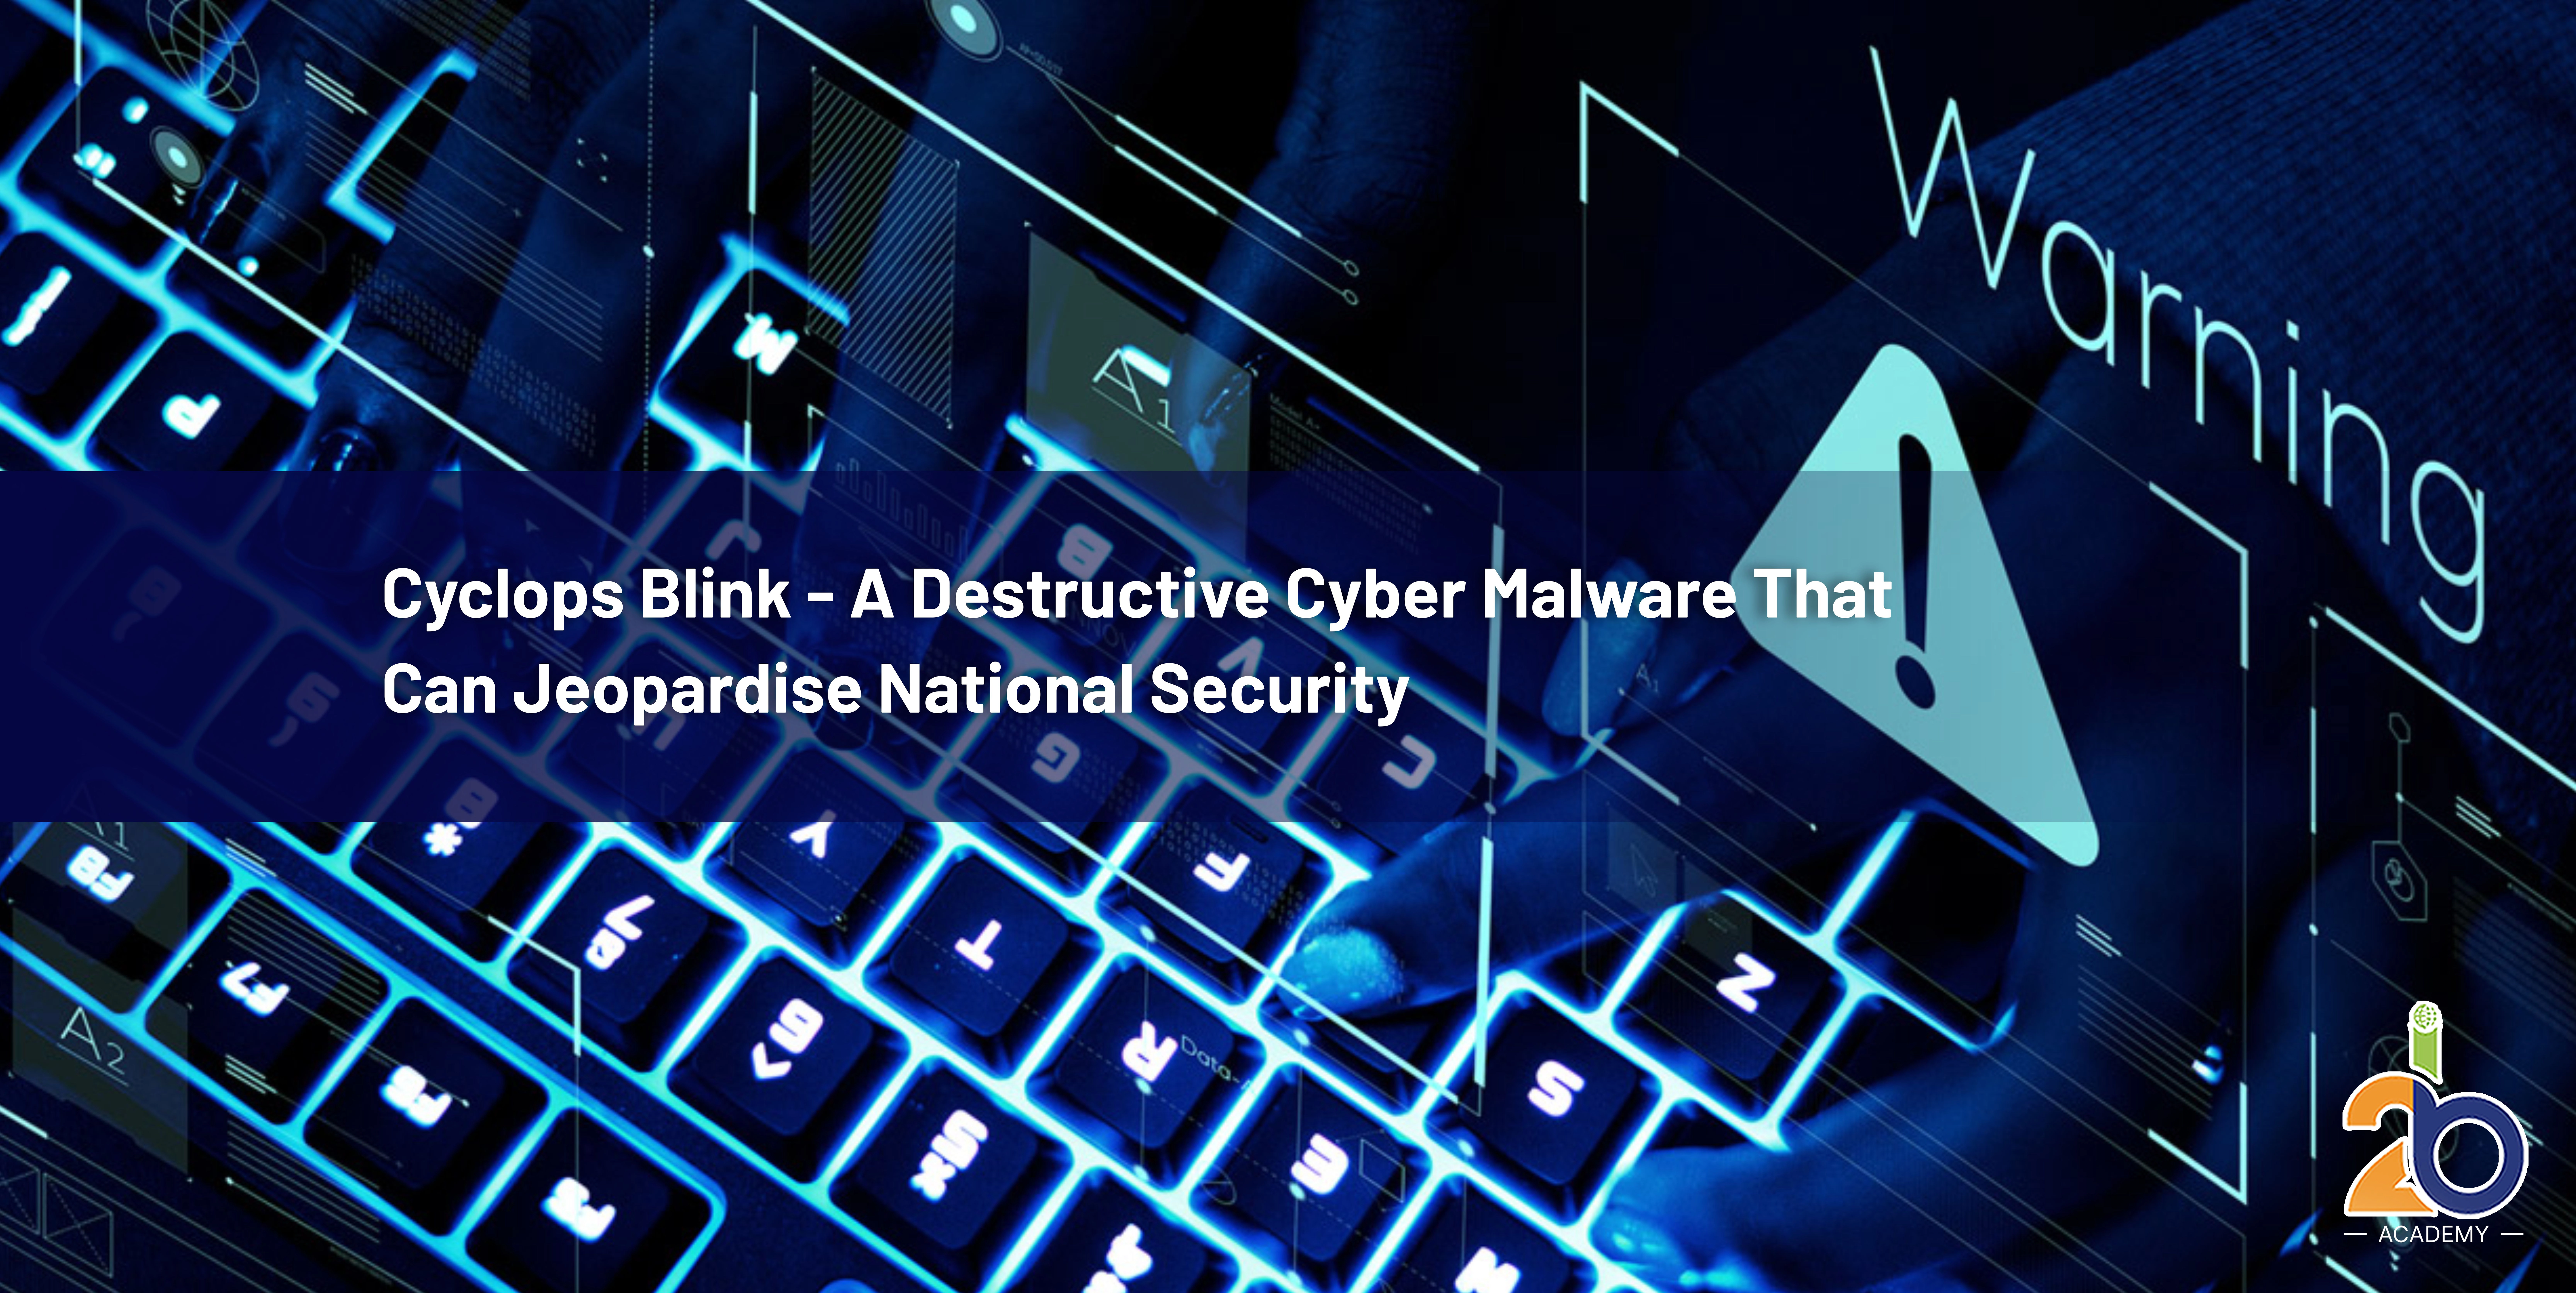 Cyclops Blink – A Destructive Cyber Malware That Can Jeopardise National Security